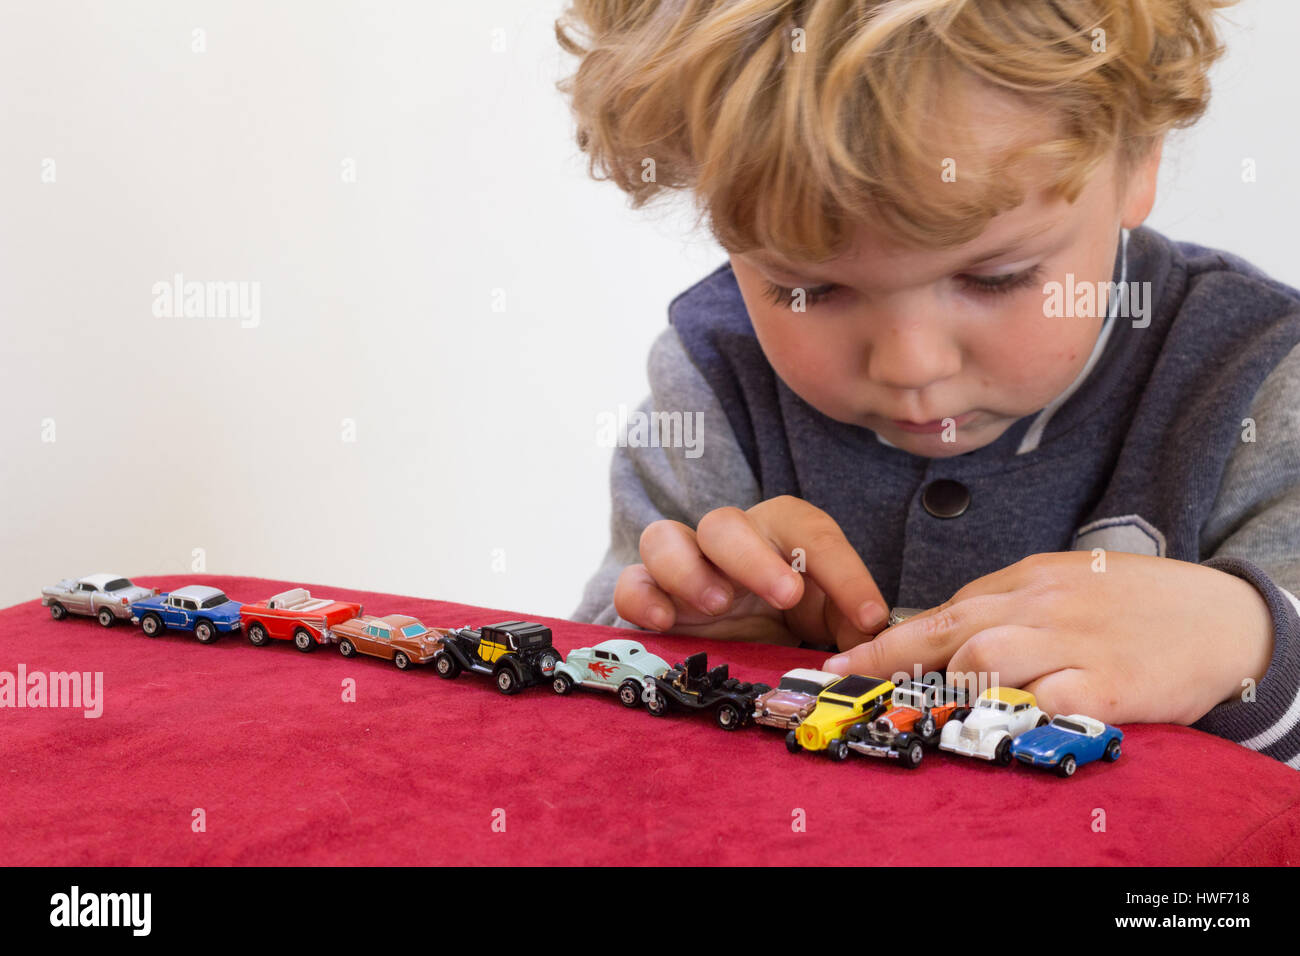 QUEENSTOWN, SOUTH AFRICA - MAY 17 2015 - Little blonde boy playing with vintage toy cars on red velvet pouf chair - Focus on his hands opening a tiny  Stock Photo